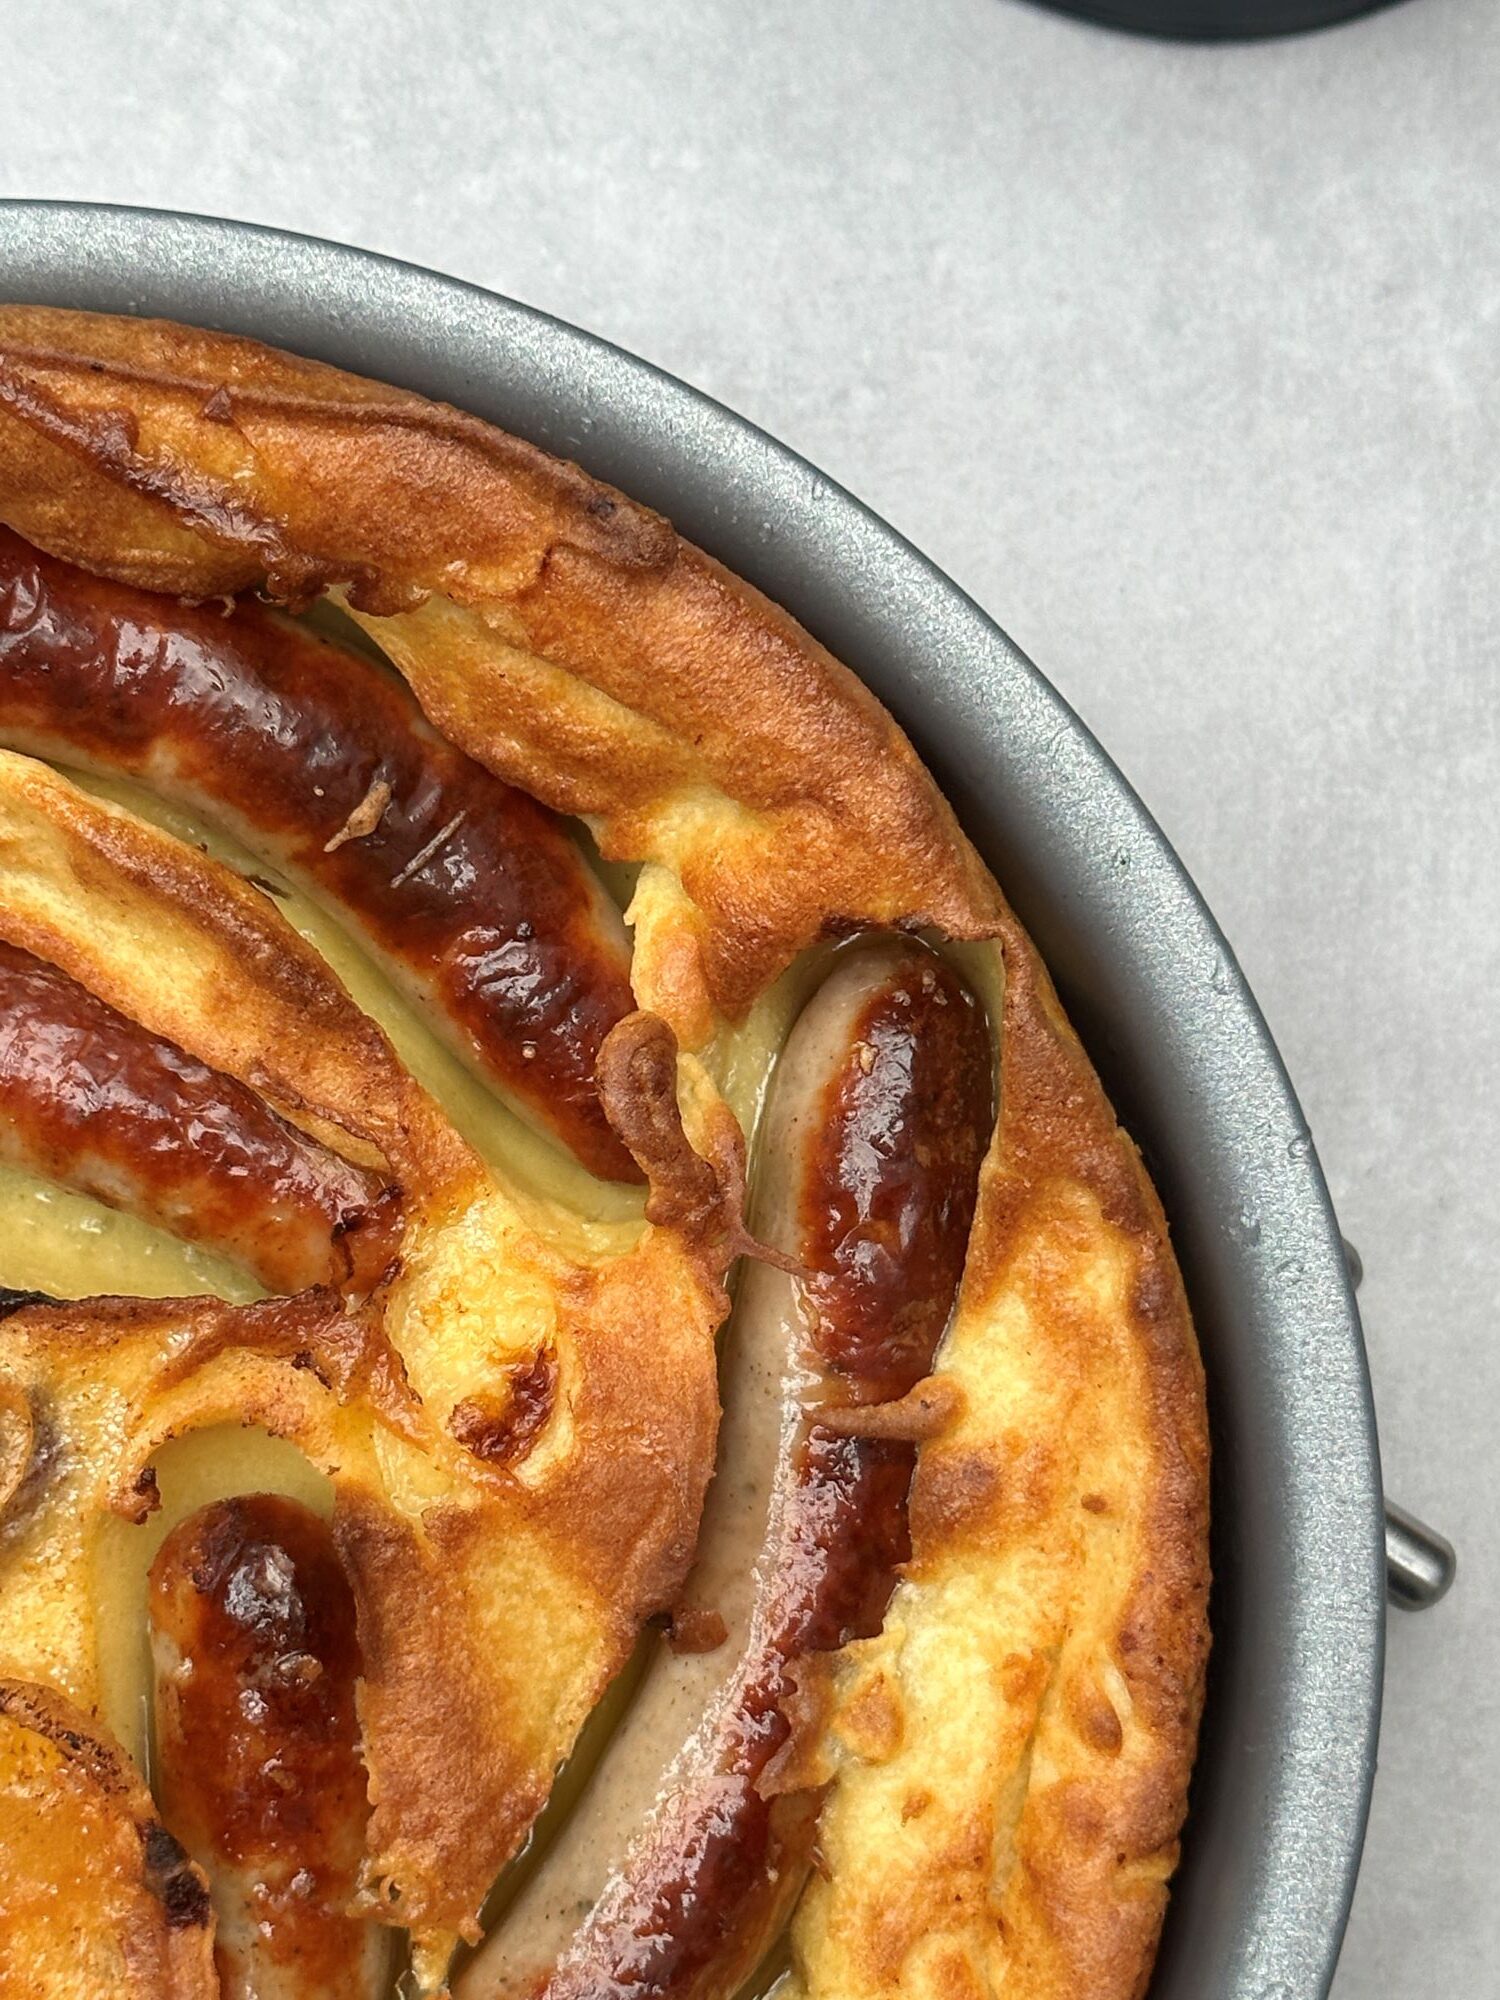 close up of toad in the hole in a baking tin. The batter has risen and the sausages are golden brown. In the corner of the picture there is part of an air fryer showing.